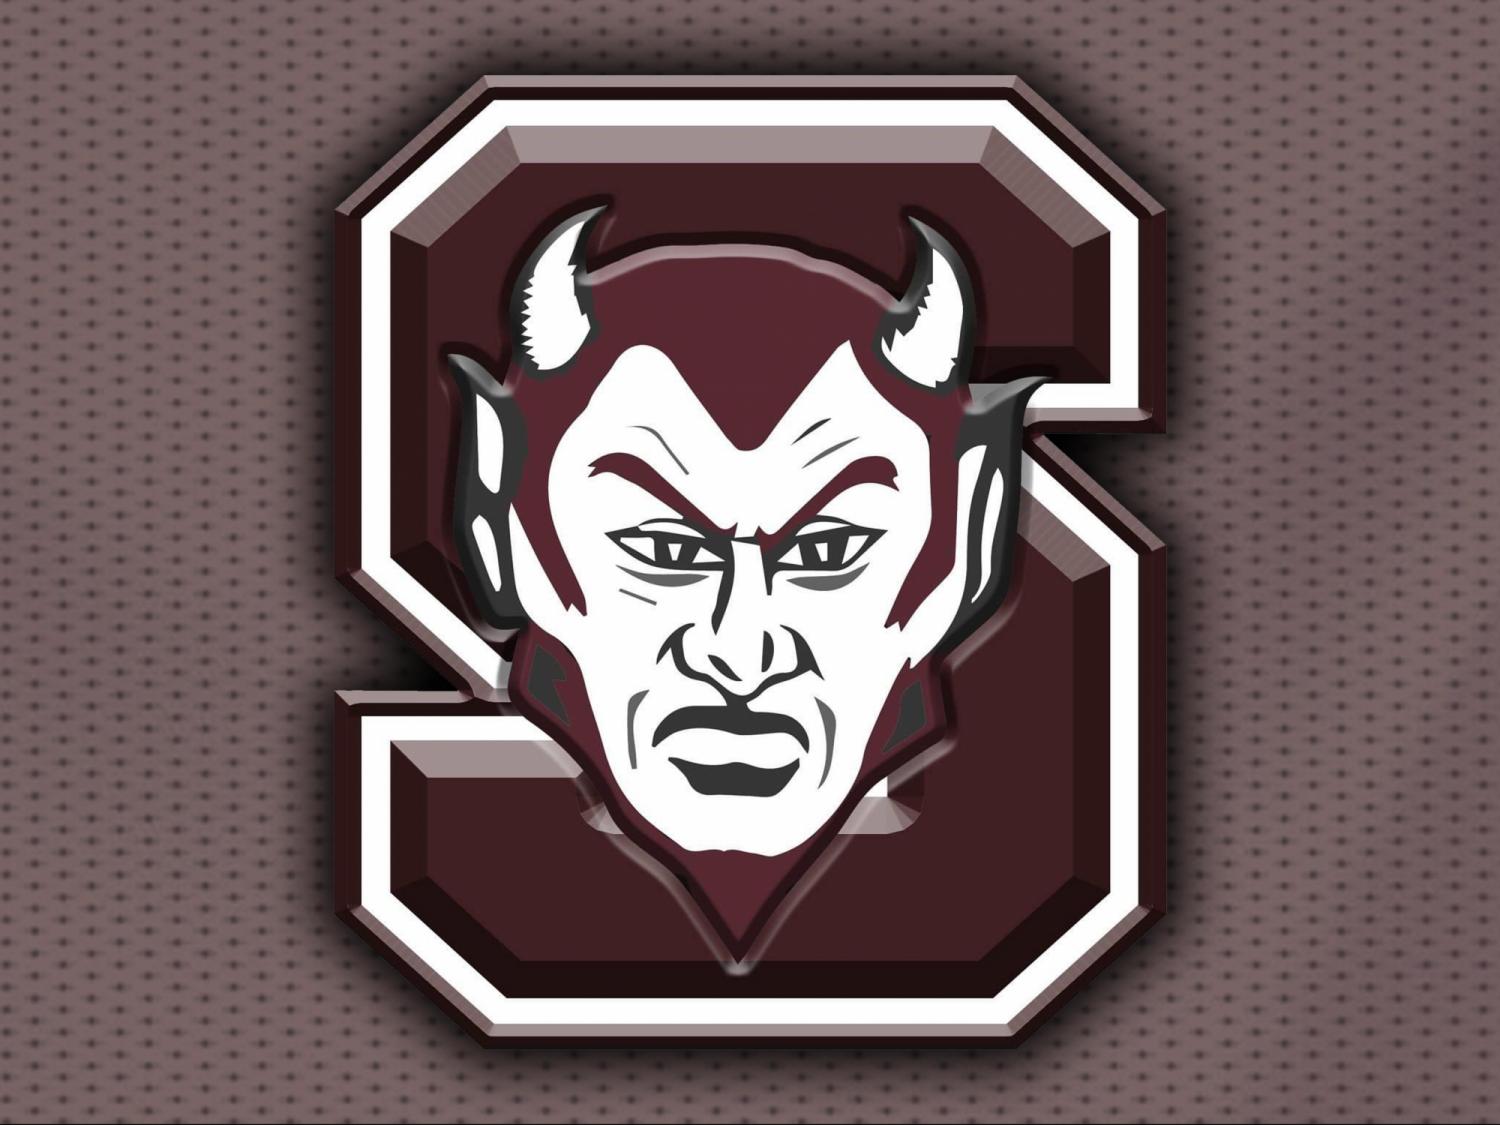 Swain County narrowly defeats Cummings to claim their third consecutive 1A/2A championship in girls' indoor track.